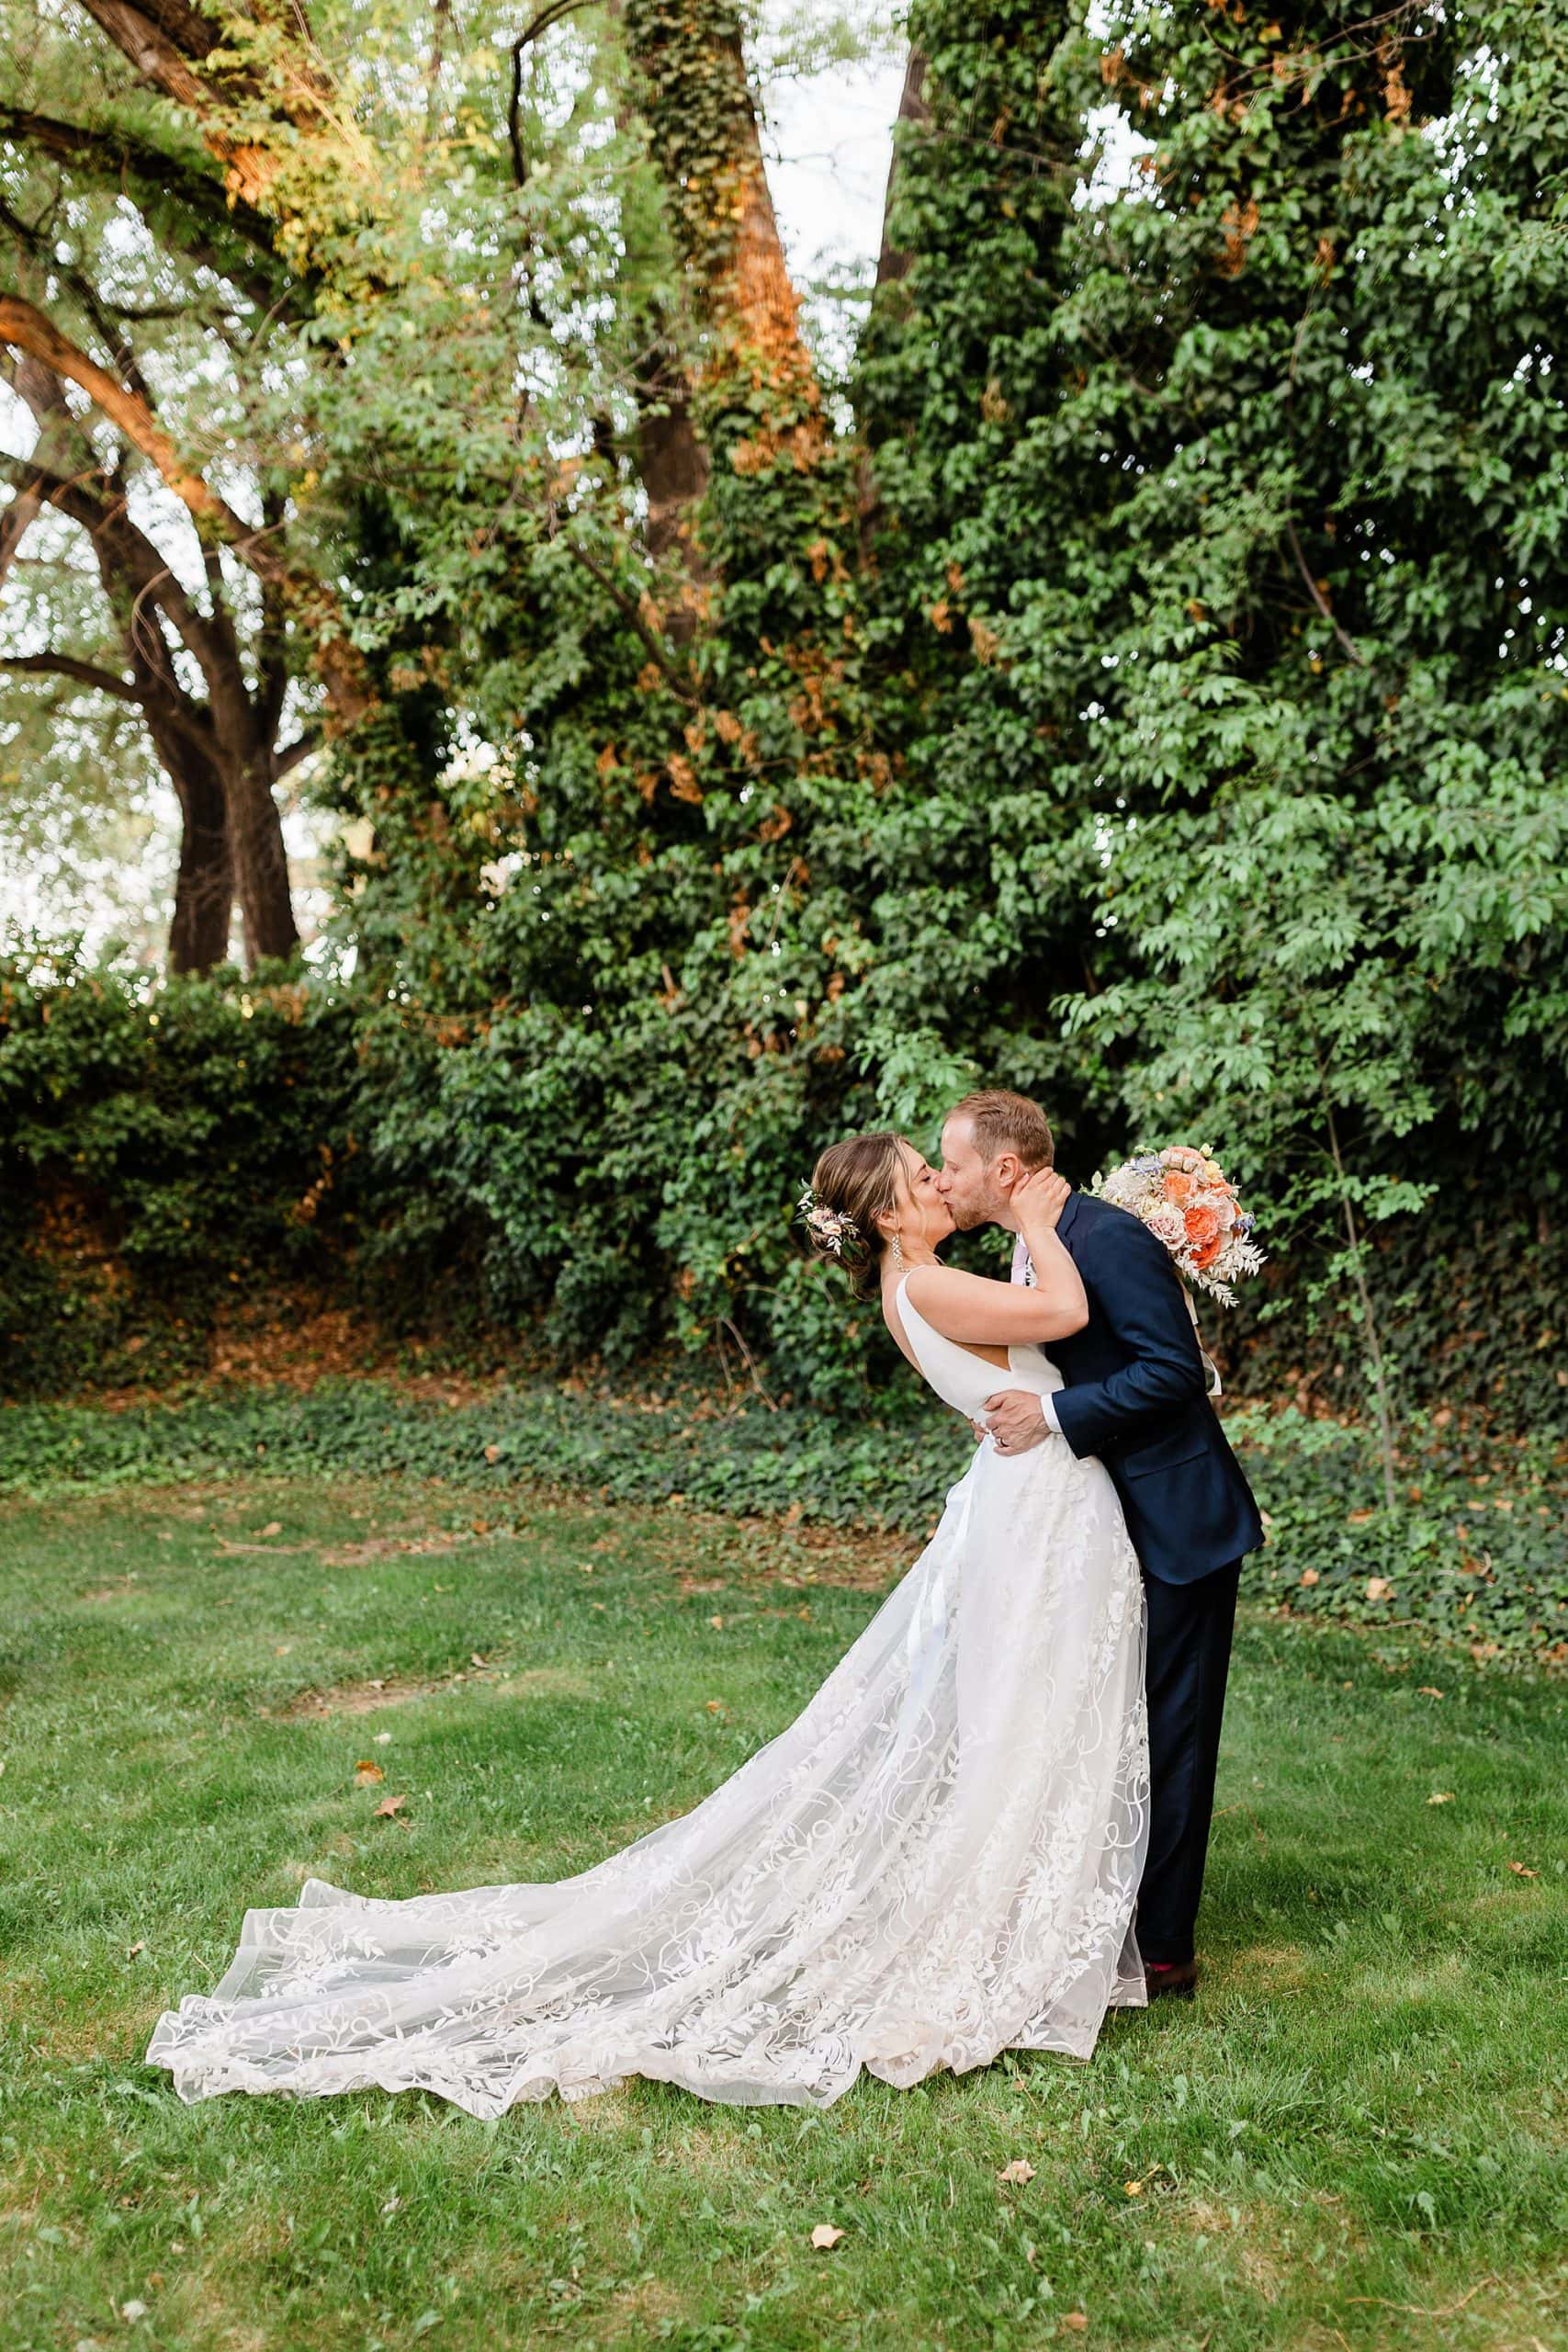 A couple kisses in a garden in New Mexico during their elopement